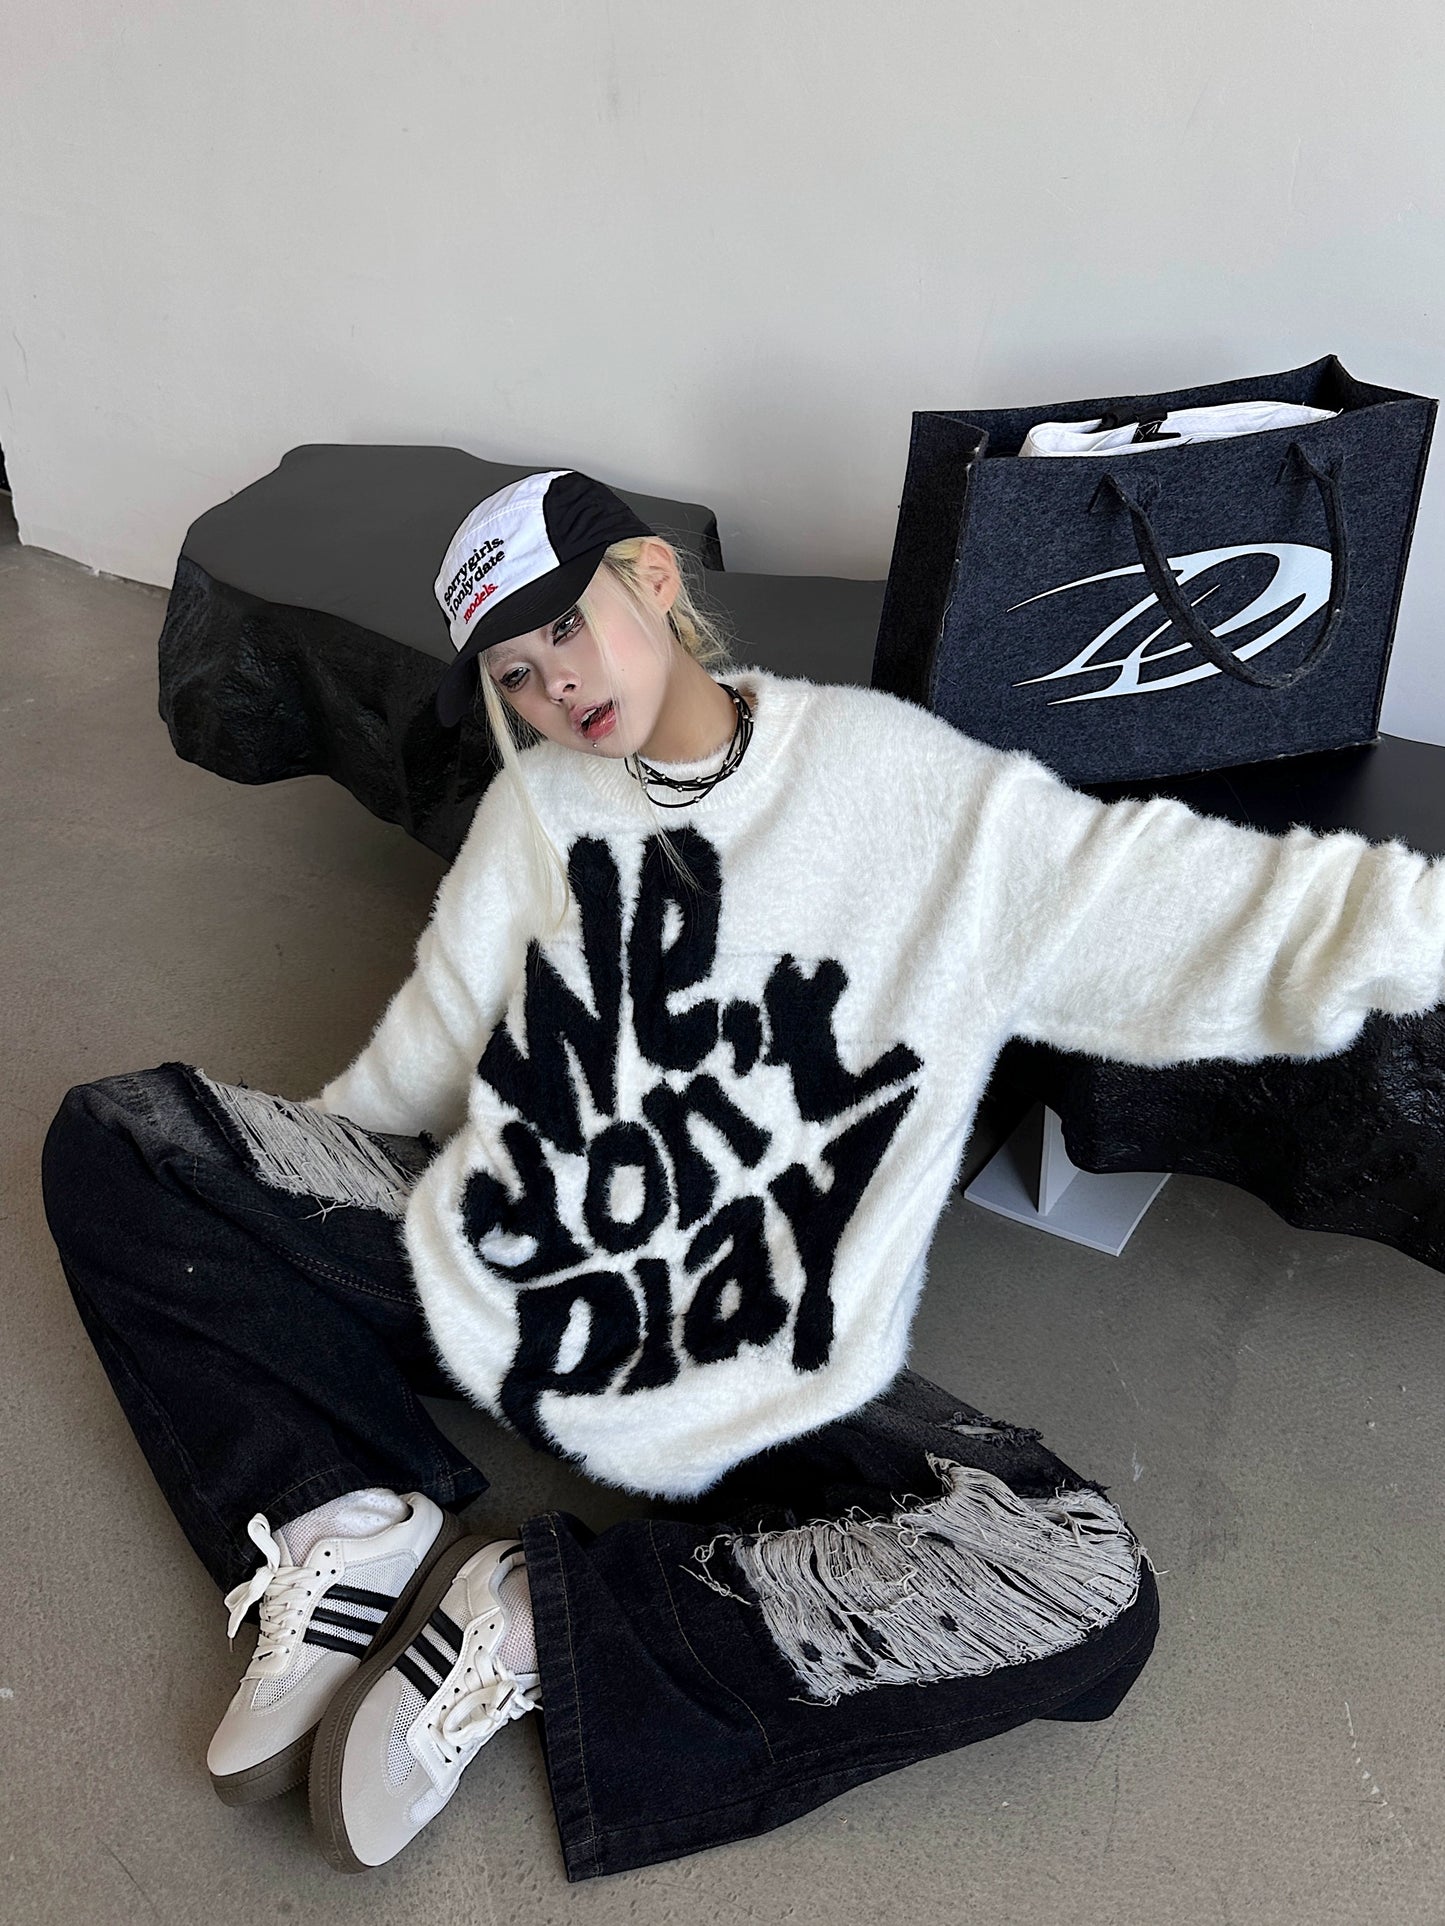 TRB American Street Lettered Jacquard Imitation Mink Crewneck Knitwear Autumn and Winter Lazy Style, Niche Couple Sweater Trend